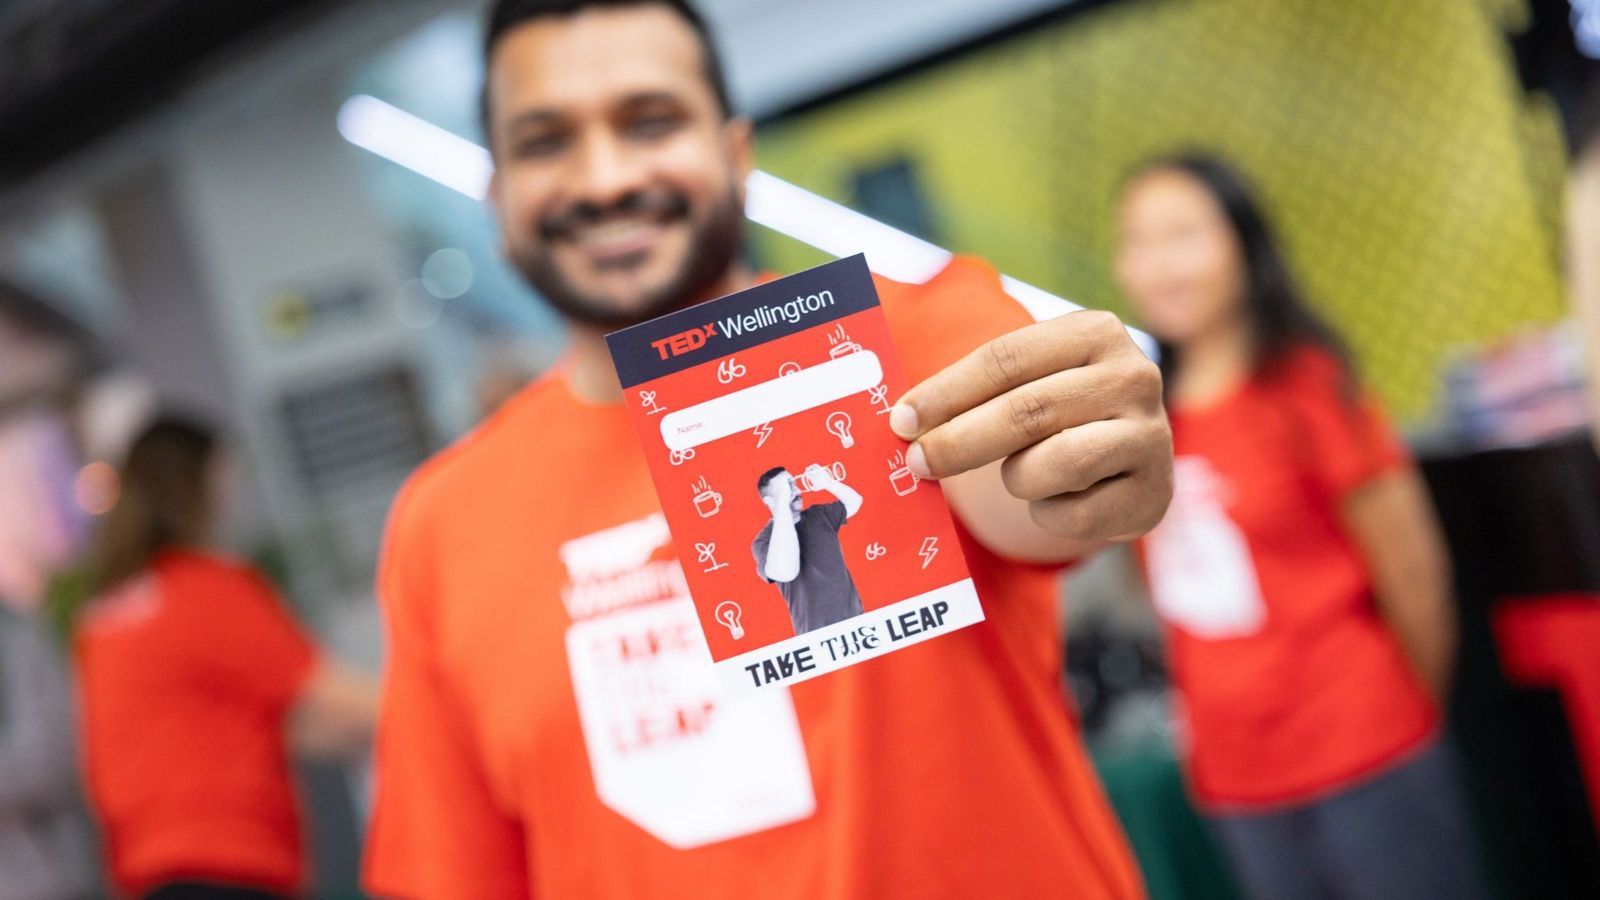 A TEDx volunteer holds out a branded lanyard towards the camera, showing the logo